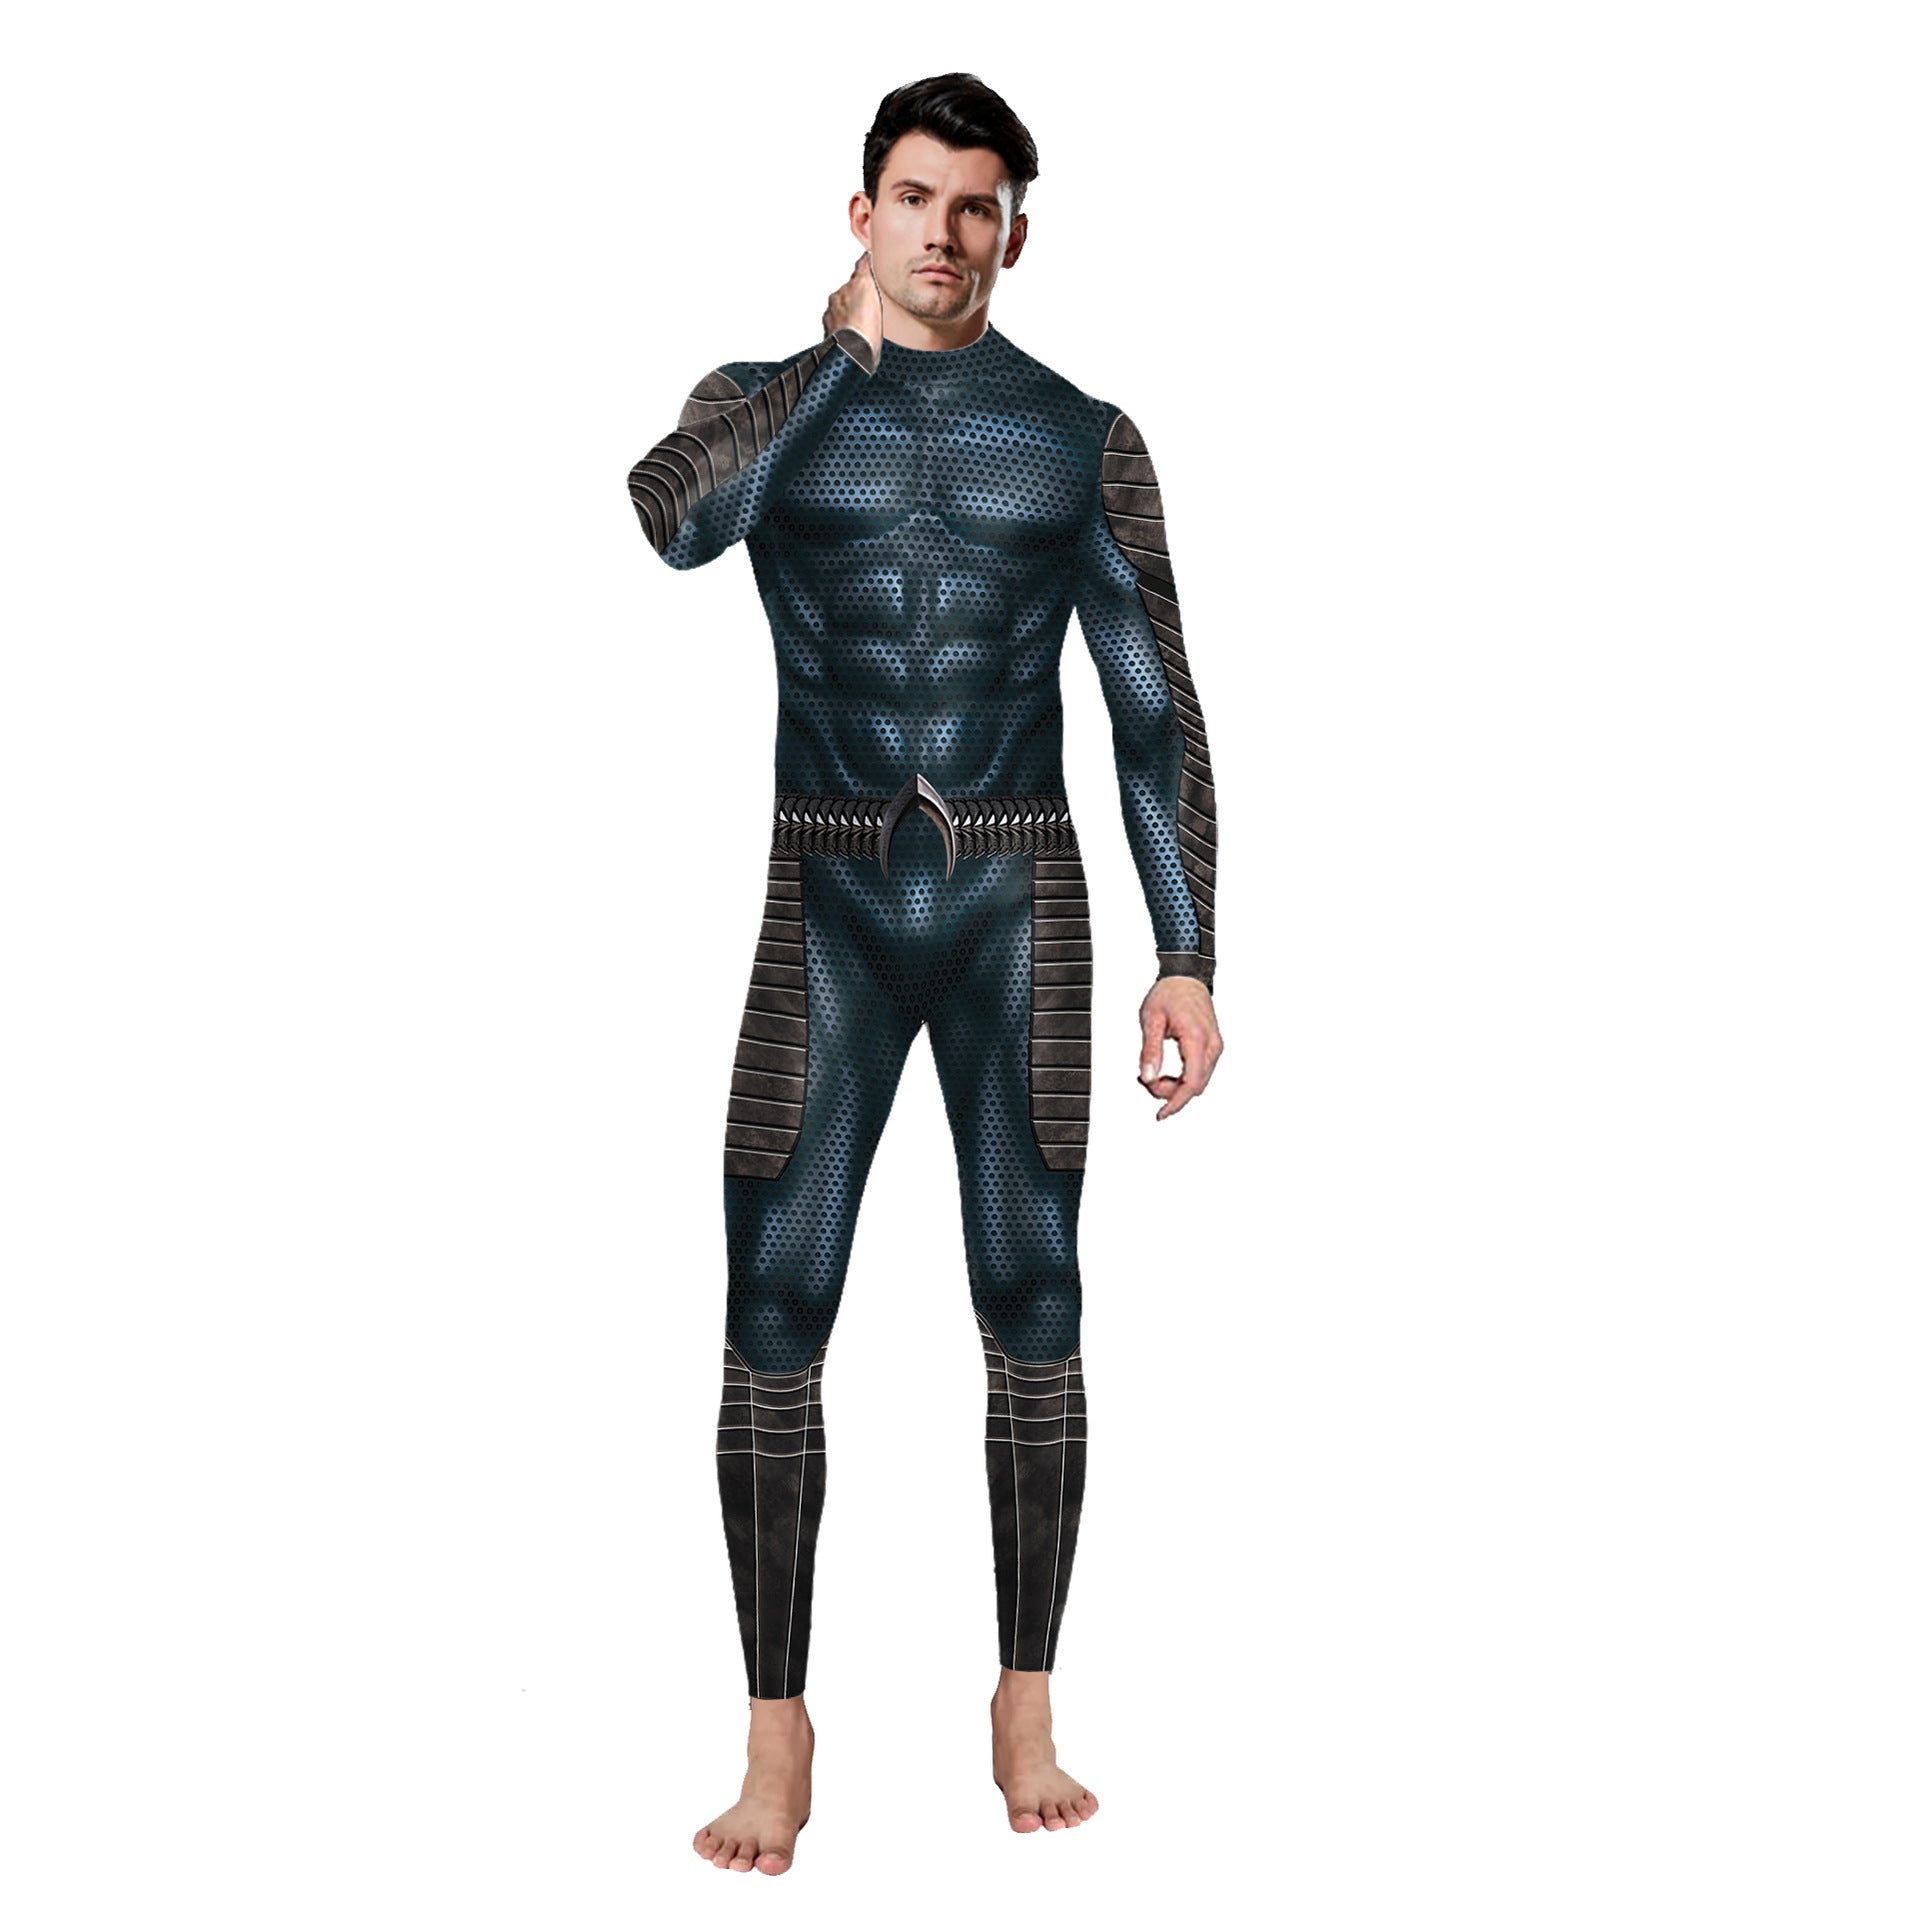 A man stands barefoot wearing a form-fitting, dark blue superhero costume with black and grey accents, reminiscent of Maramalive™ Digital Halloween Costume Leggings - Spooky Tights. He is touching his neck with one hand. The background is white.